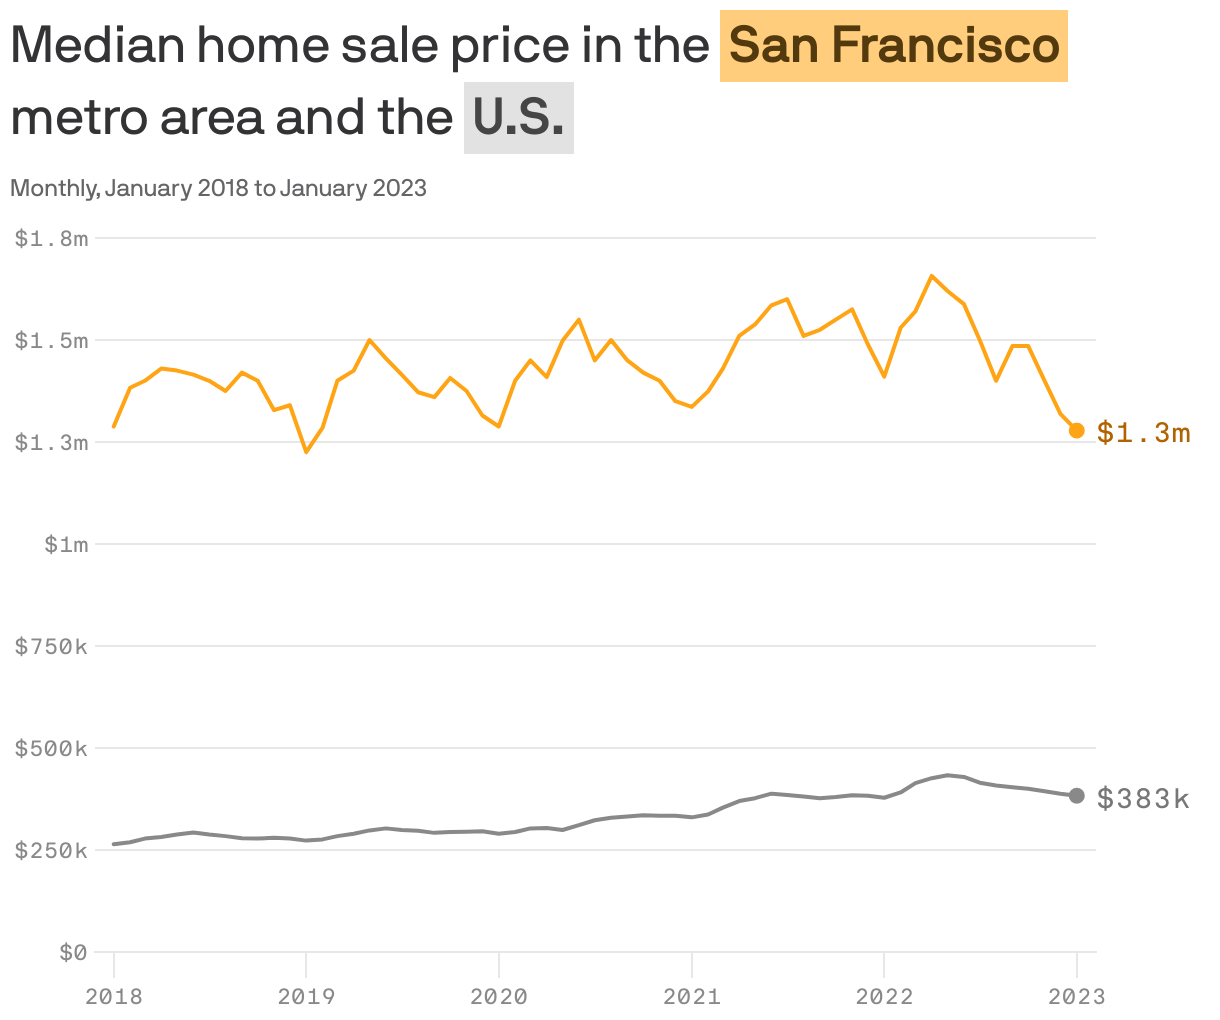 Median home sale price in the <b style='background-color: #FFCD7B; color: #53390E; display: inline-block; padding: 1px 4px; whitespace: no-wrap;'>San Francisco</b> metro area and the <b style='background-color: #E2E2E2; color: #454545; display: inline-block; padding: 1px 4px; whitespace: no-wrap;'>U.S.</b>